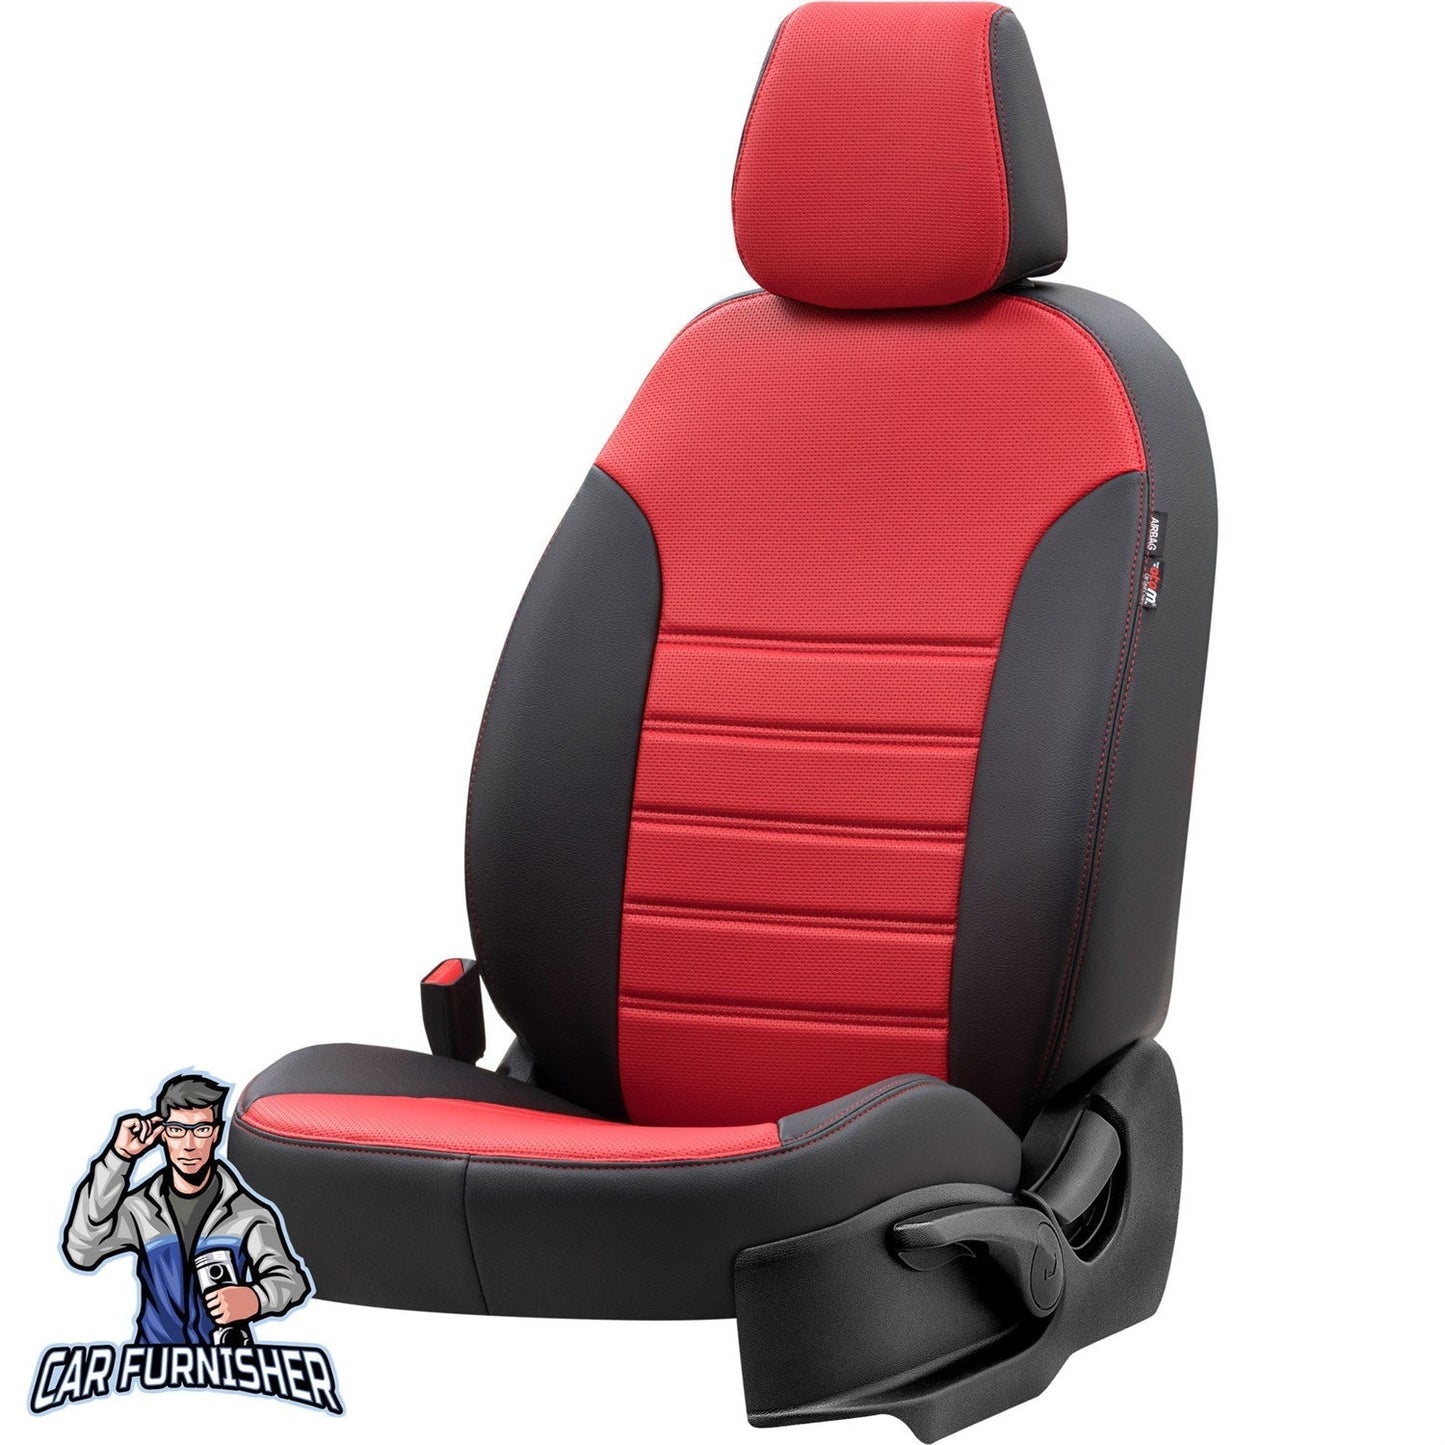 Fiat Bravo Seat Covers New York Leather Design Red Leather